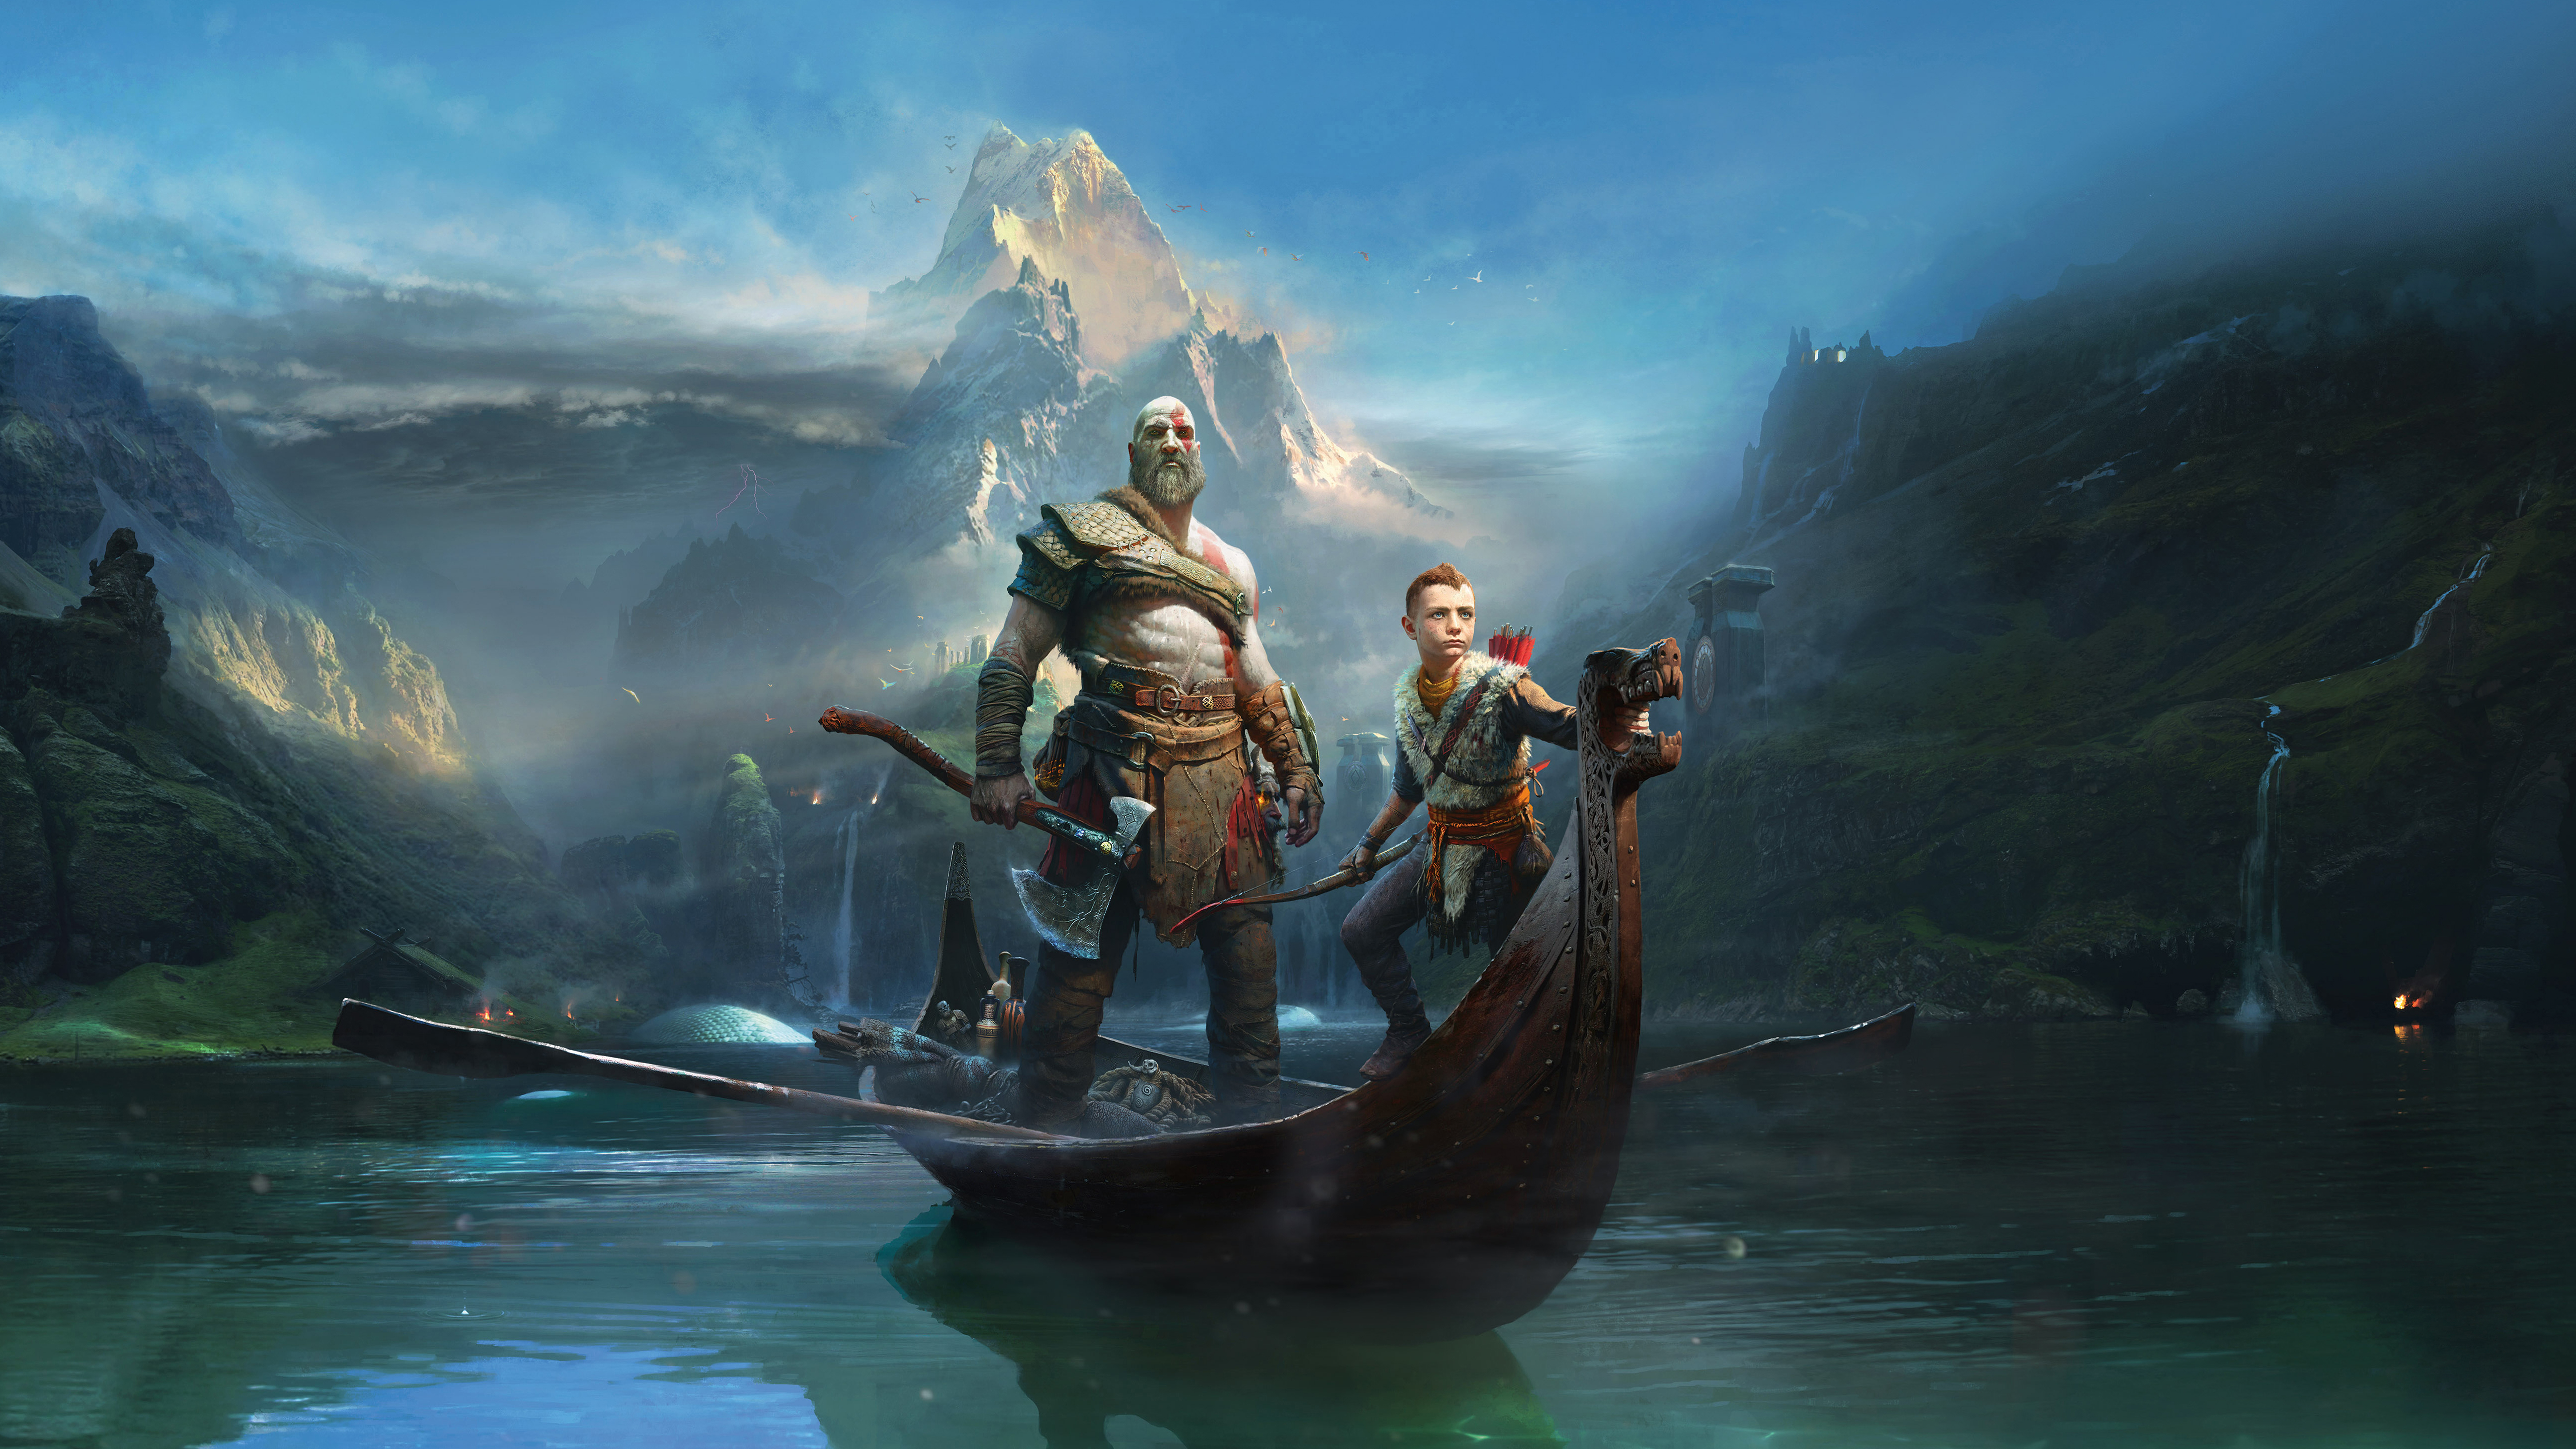 520+ God of War HD Wallpapers and Backgrounds